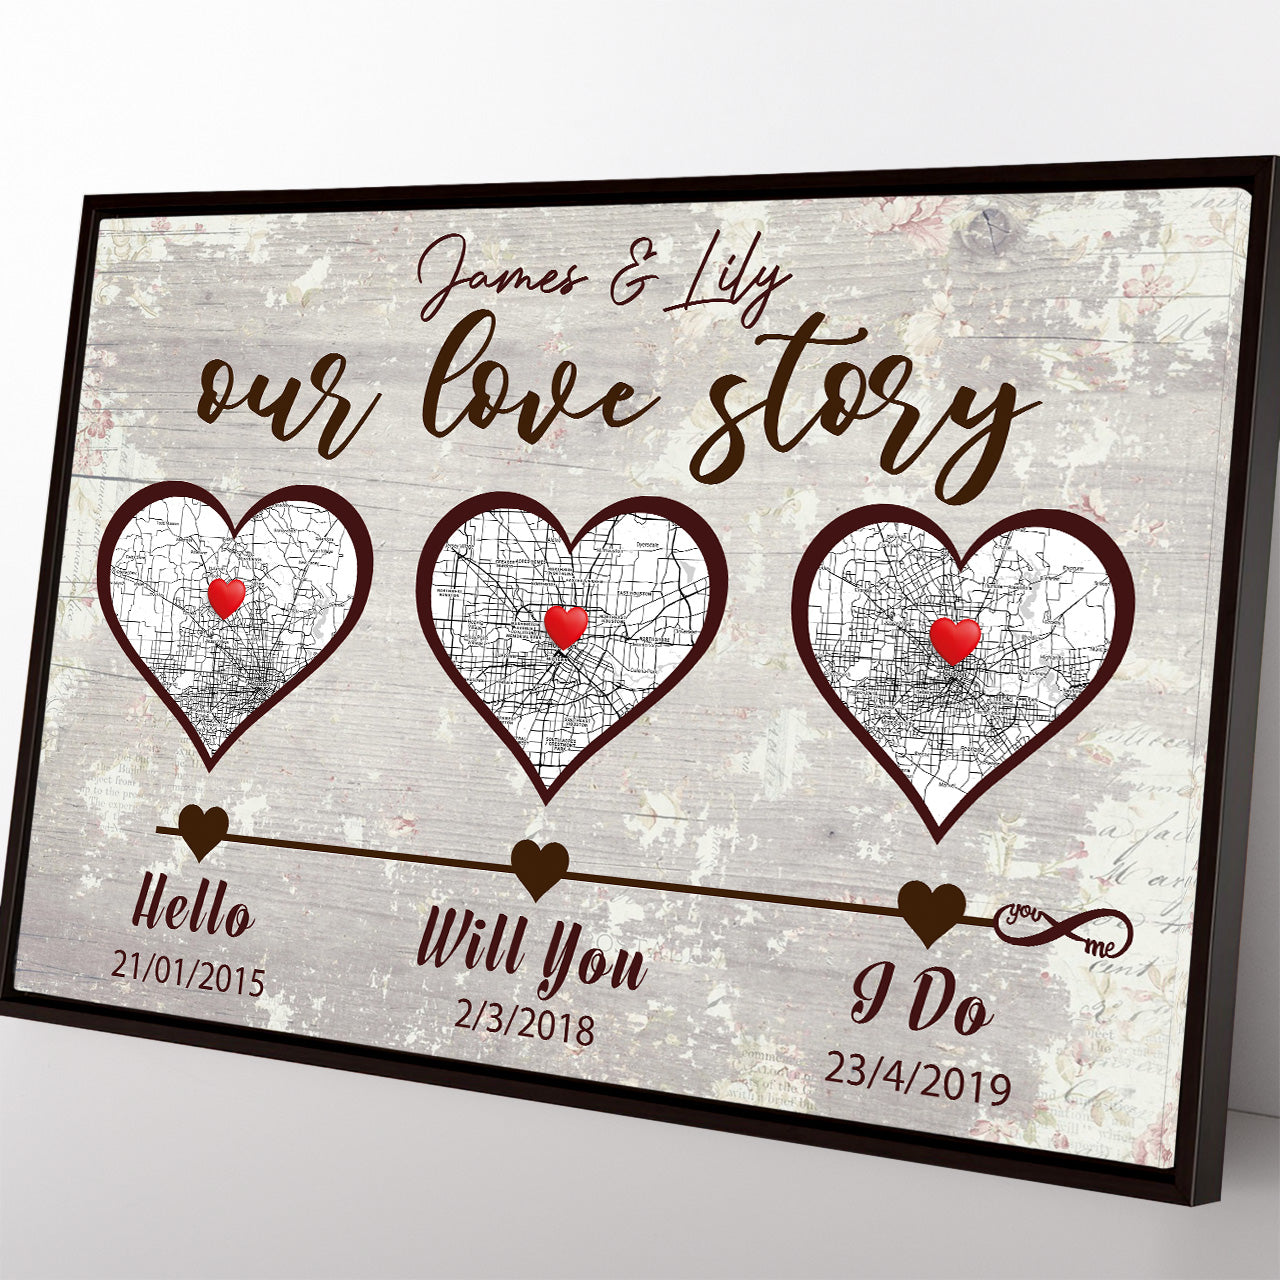 HAPPY ANNIVERSARY GIFT HEART GIFT Graphic by The Art Ink Jewelry